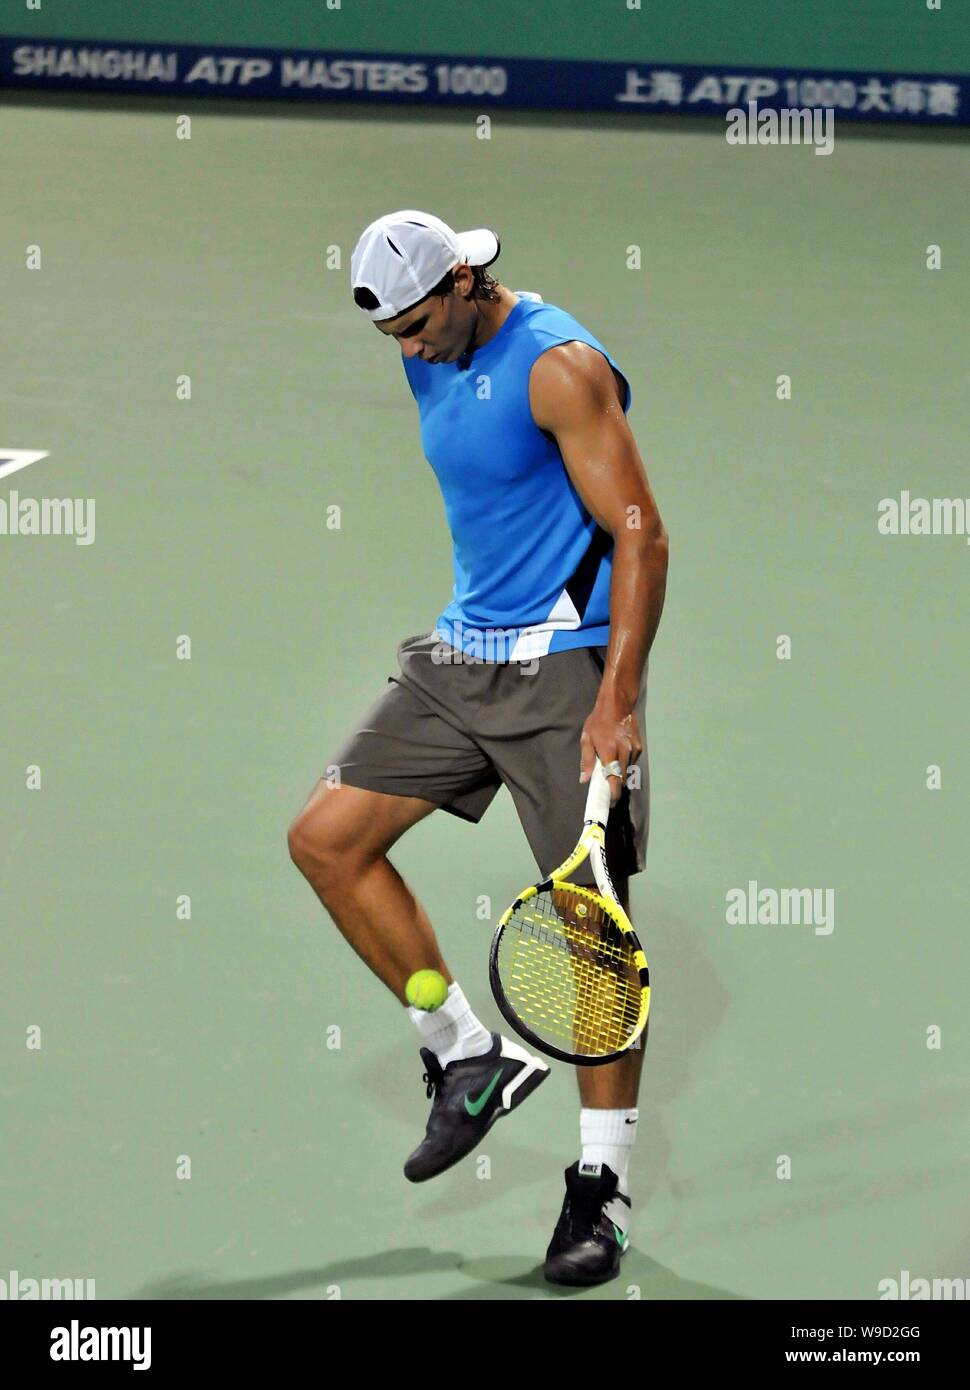 Spanish tennis player Rafael Nadal practises during a training session for  the 2009 Shanghai ATP Masters 1000 in Shanghai, China, Sunday, October 11  Stock Photo - Alamy